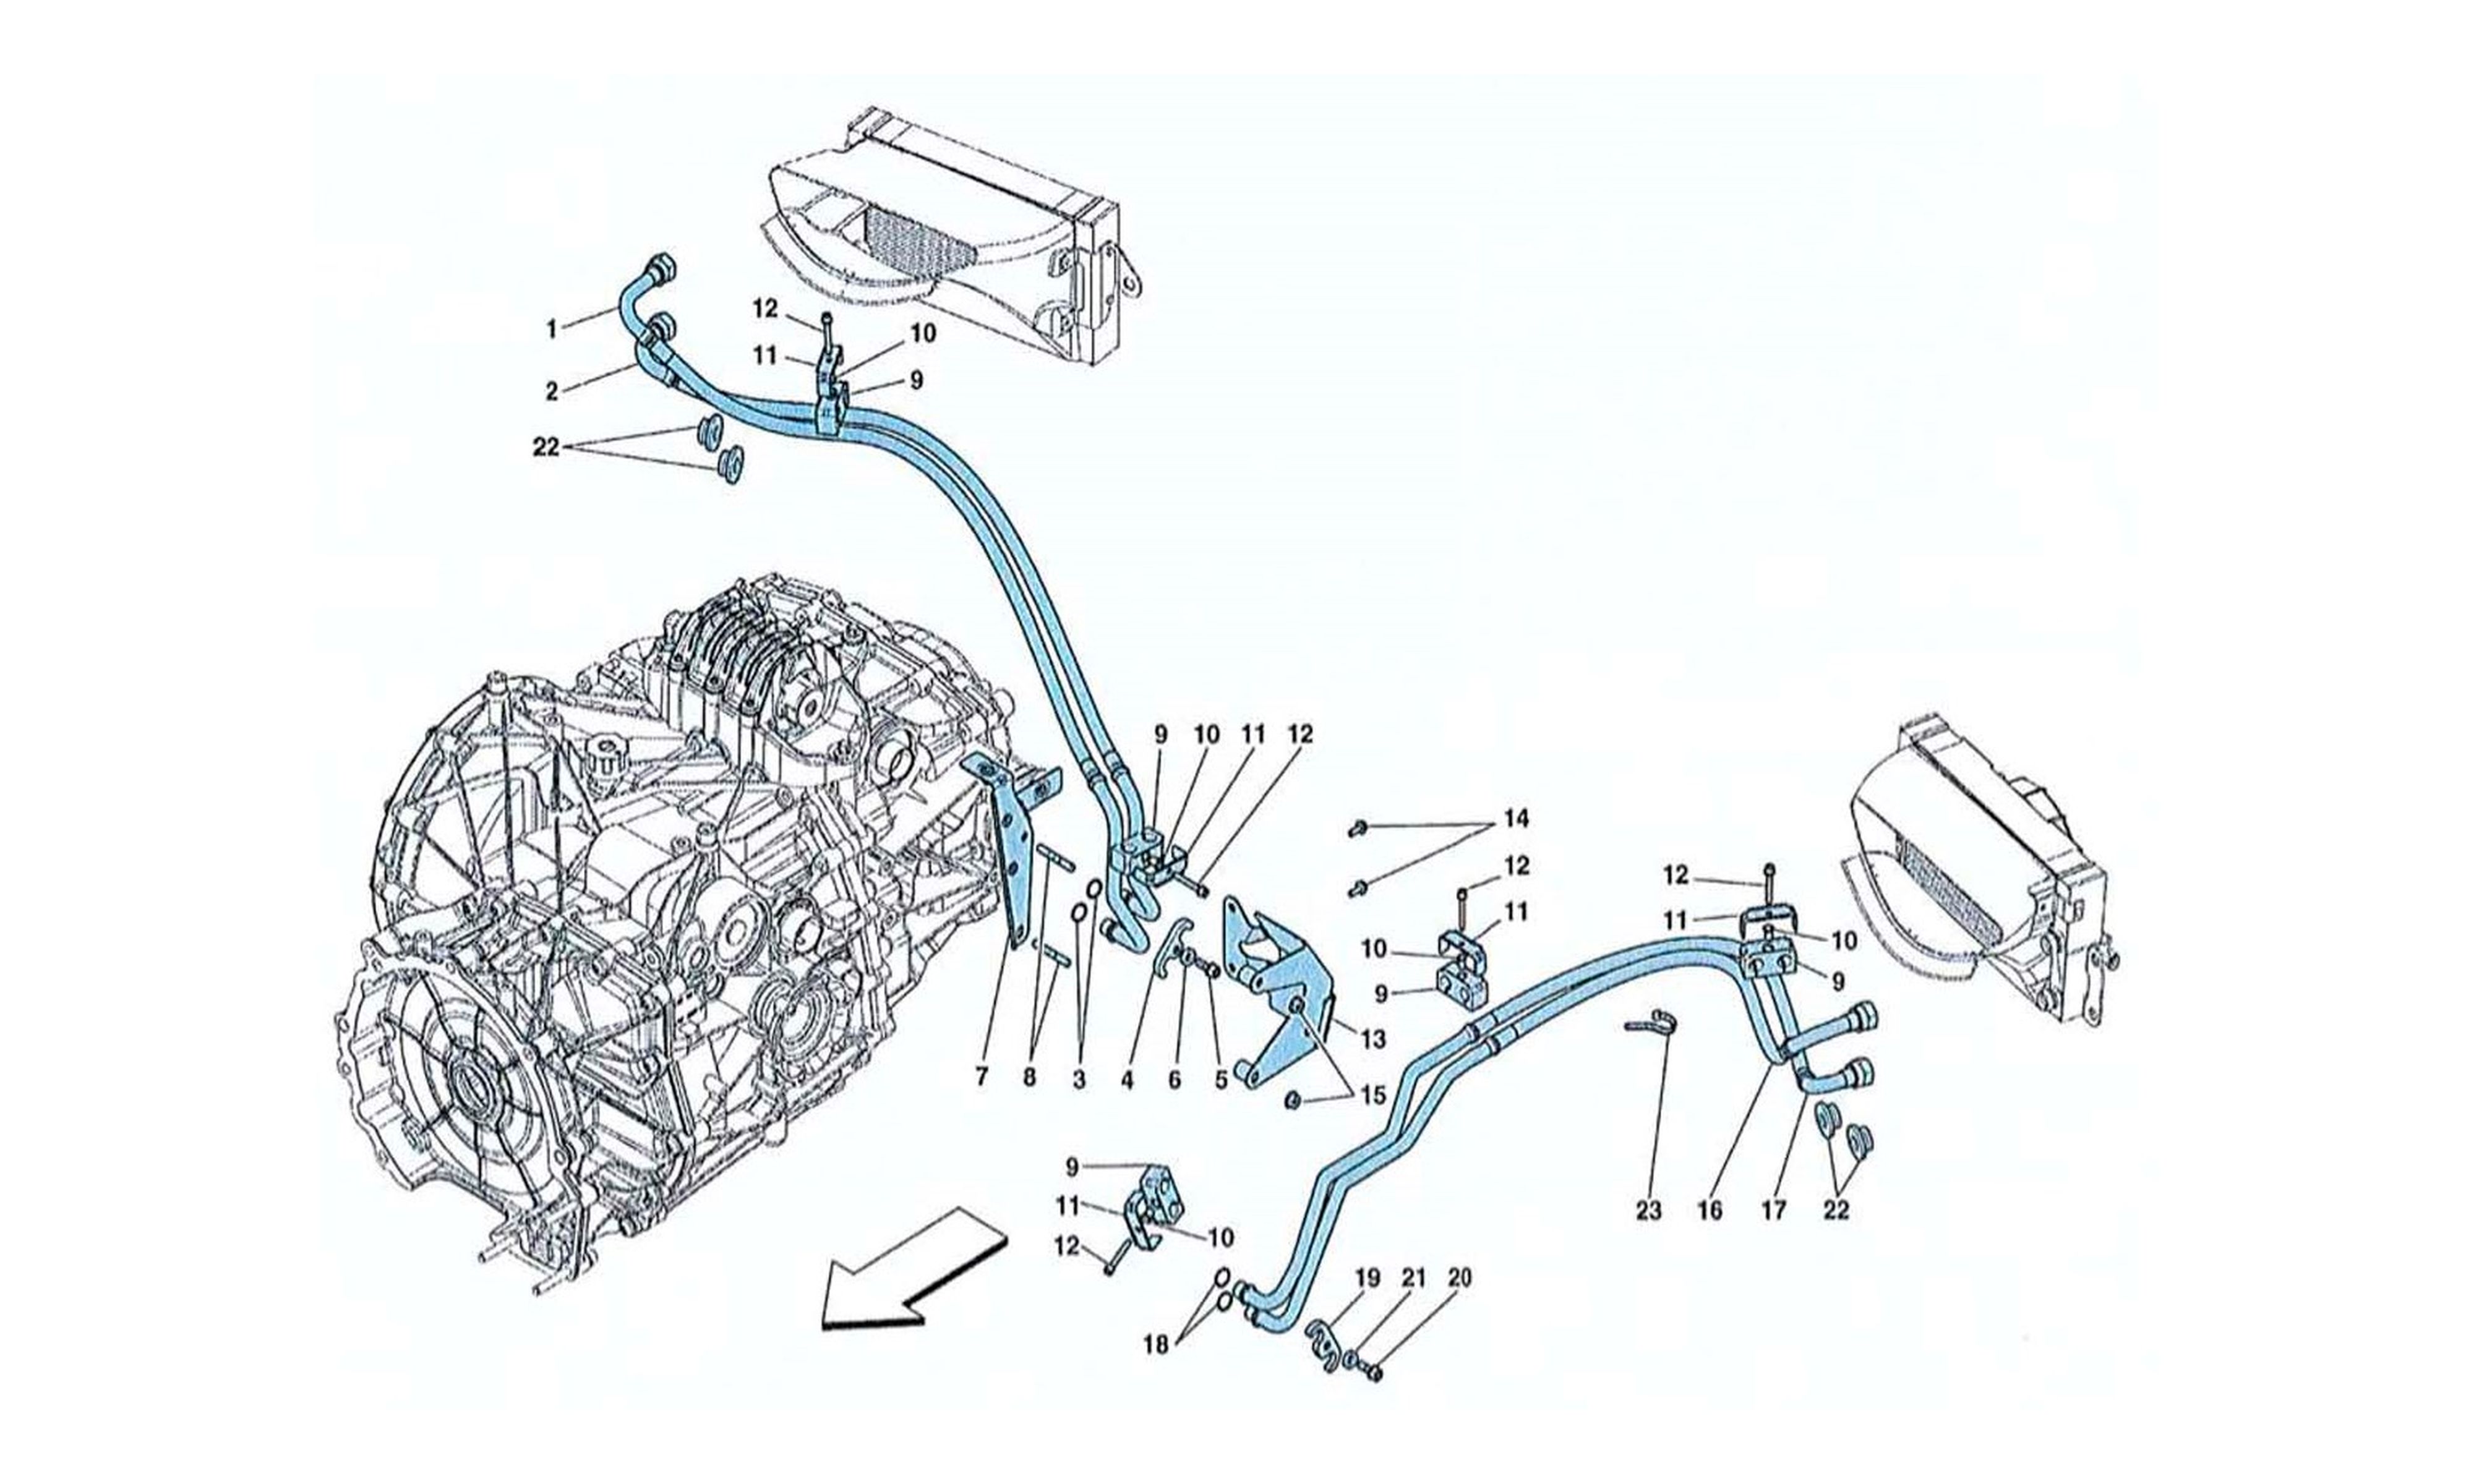 Schematic: Gearbox Oil Lubrication And Cooling System